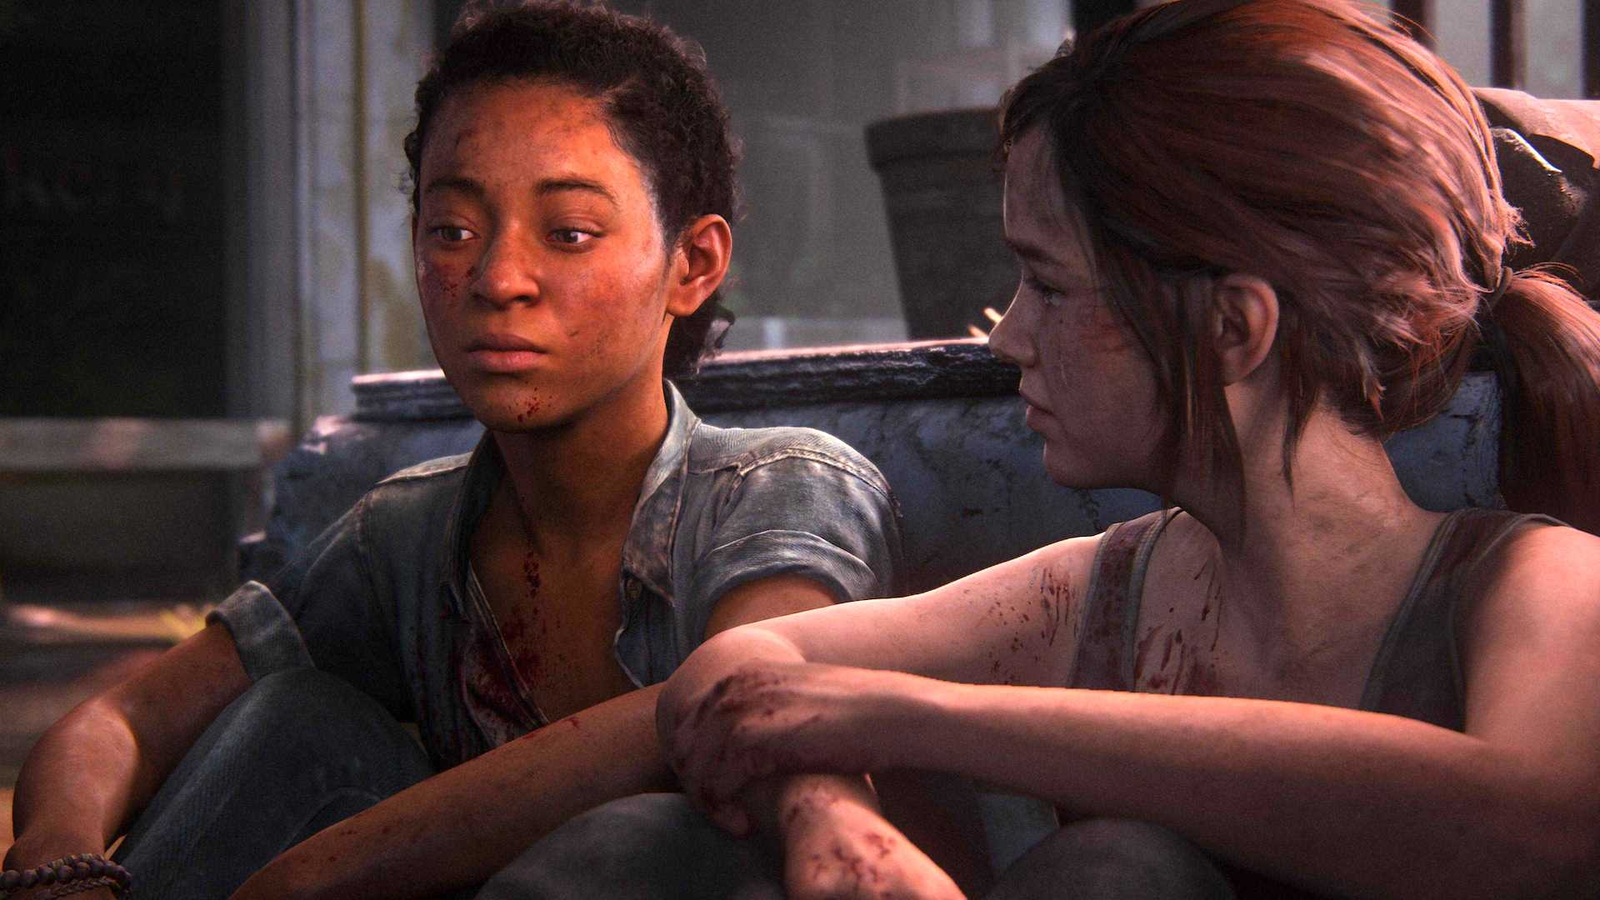 The Last of Us Gameplay Walkthrough Part 1 - Infected 